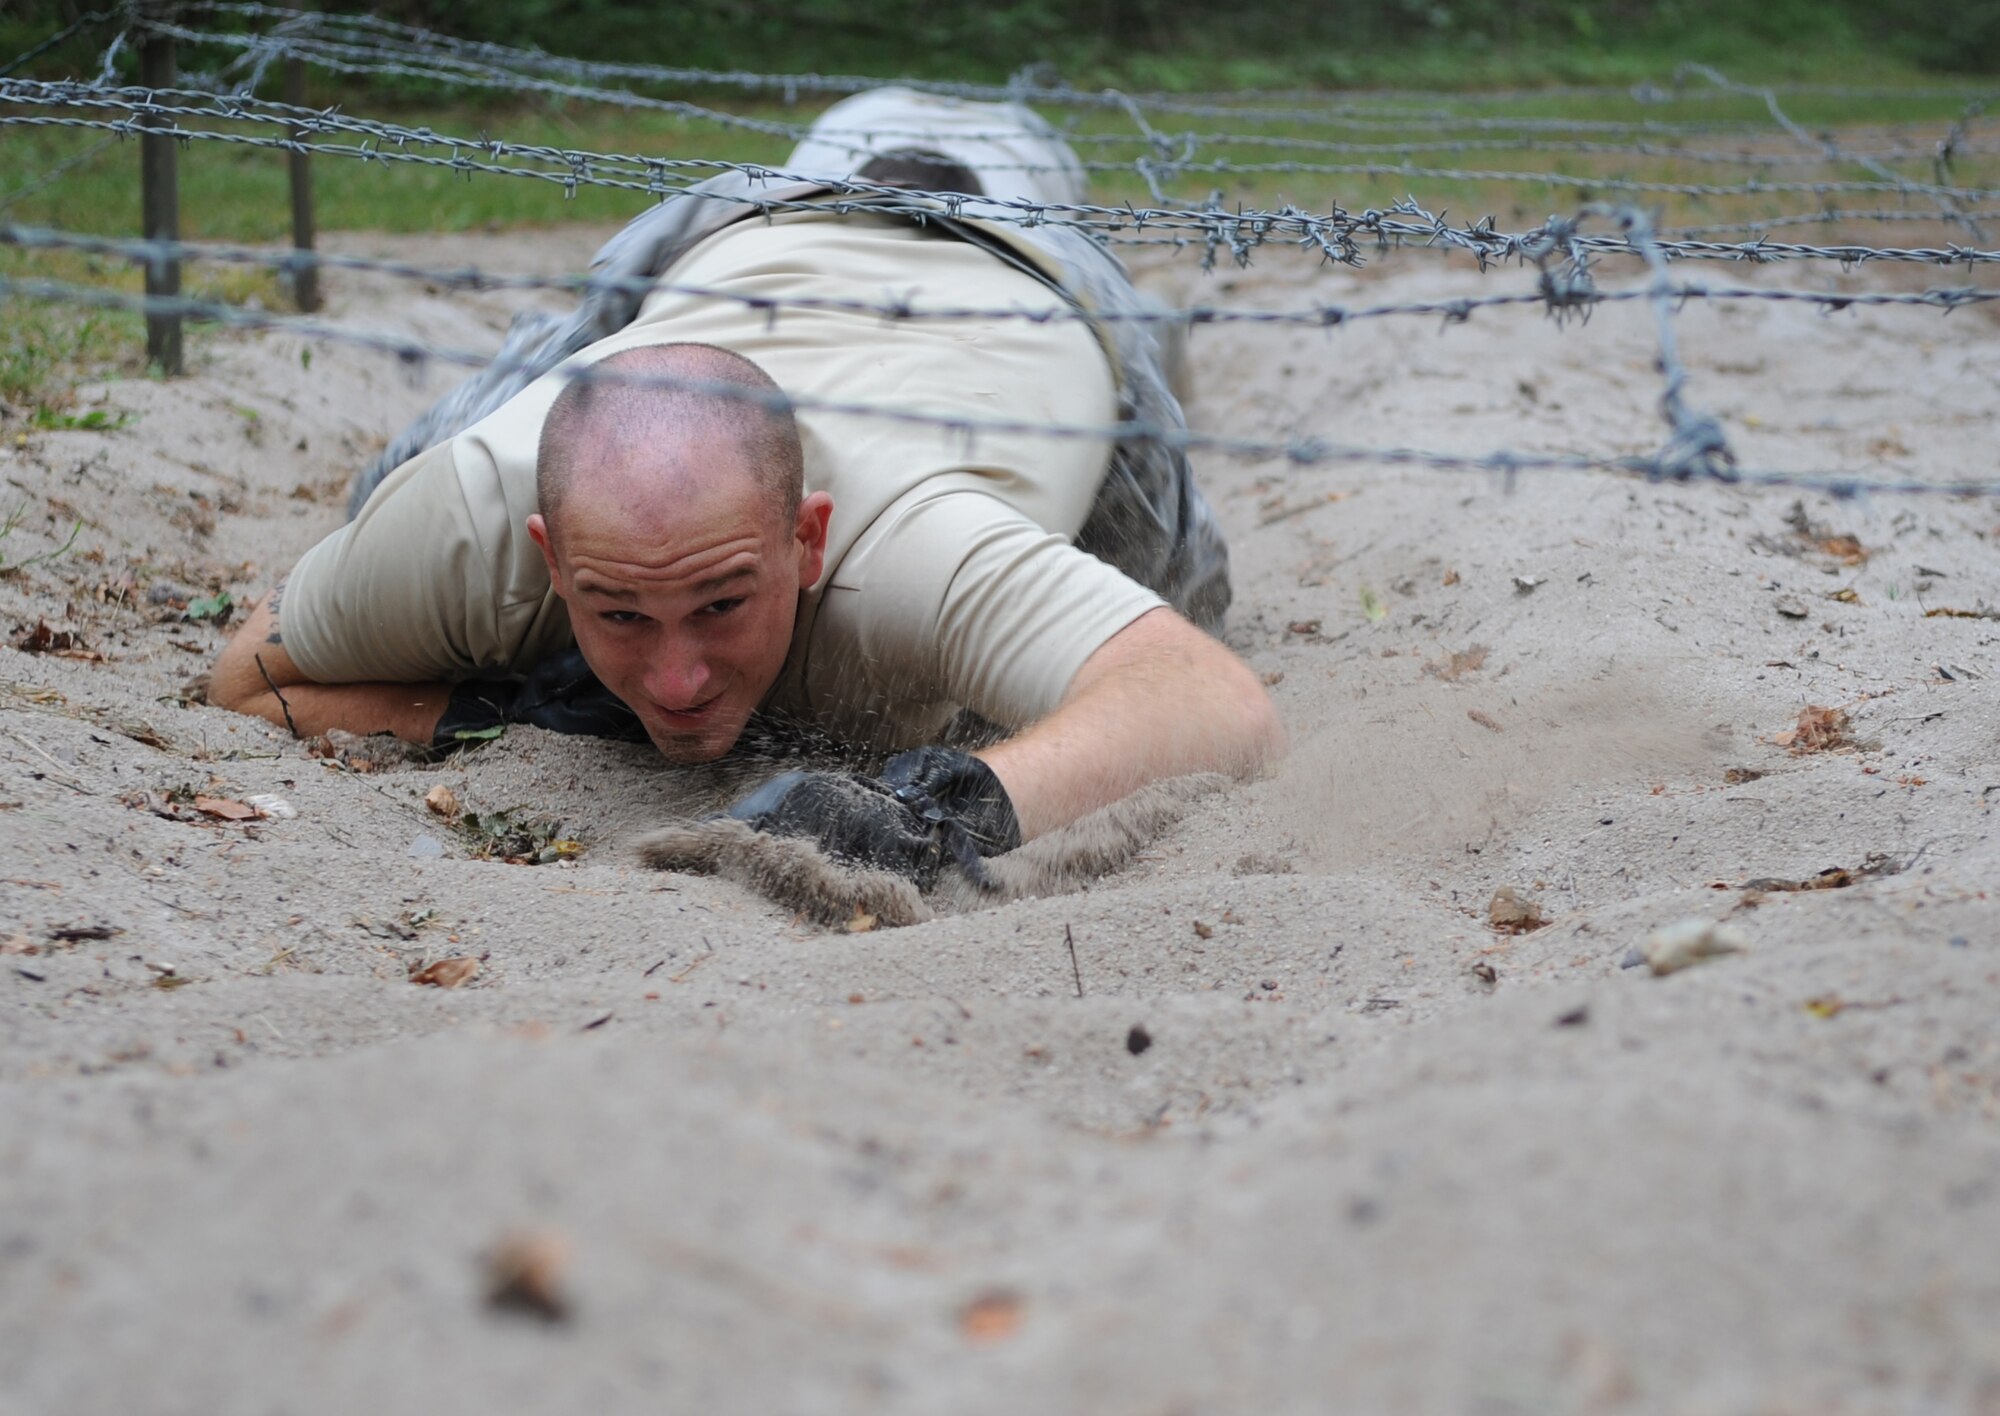 U.S. Air Force 1st Lt. Douglas Sparacio, 4th Air Support Operations Squadron intelligence duty officer stationed at  Sullivan Barracks, Mannheim, Germany, attempts to complete an obstacle during ALLIED STRIKE 10, Grafenwoehr, Germany, July 23, 2010. AS 10 is Europe's premier close air support (CAS) exercise, held annually to conduct robust, realistic CAS training that helps build partnership capacity among allied North Atlantic Treaty Organization nations and joint services while refining the latest operational CAS tactics. For more ALLIED STRIKE information go to www.usafe.af.mil/alliedstrike.asp. (U.S. Air Force photo by Senior Airman Caleb Pierce)